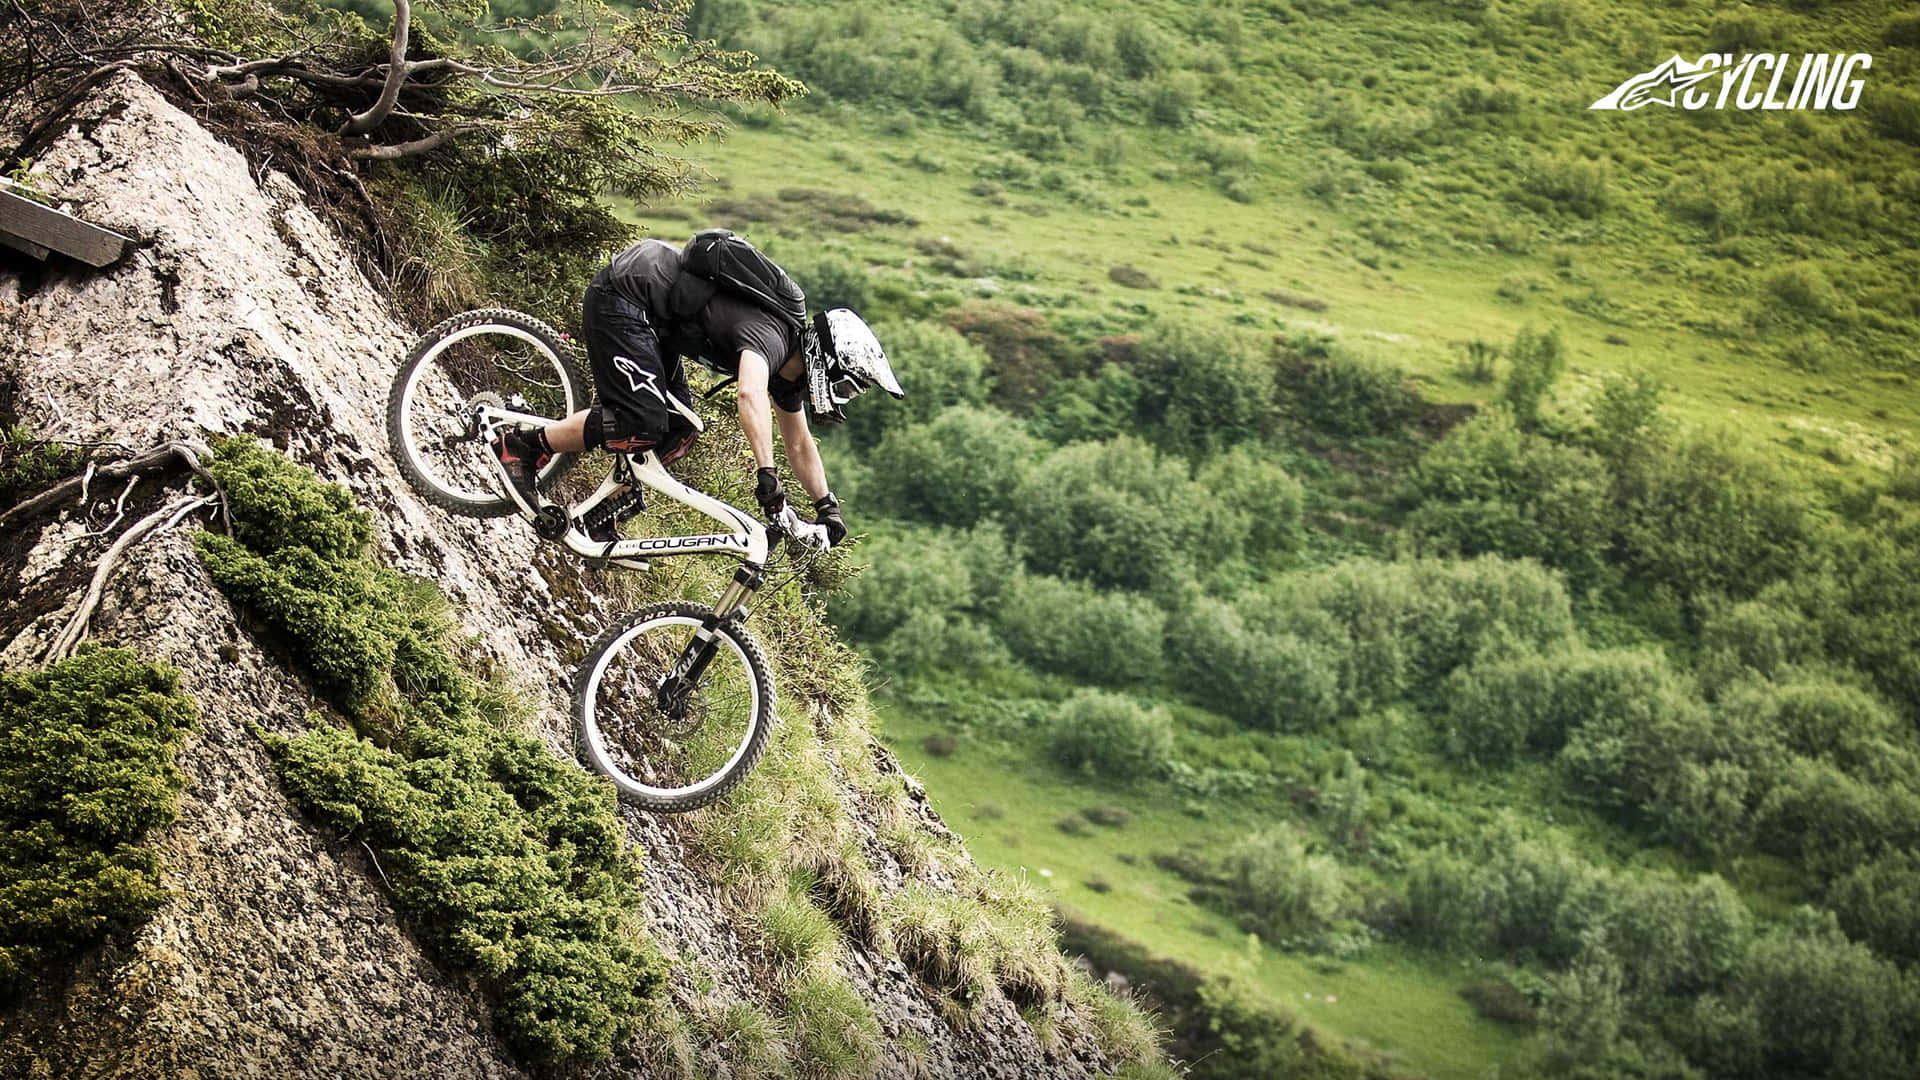 Thrilling Mountain Bike Adventure in the Forest